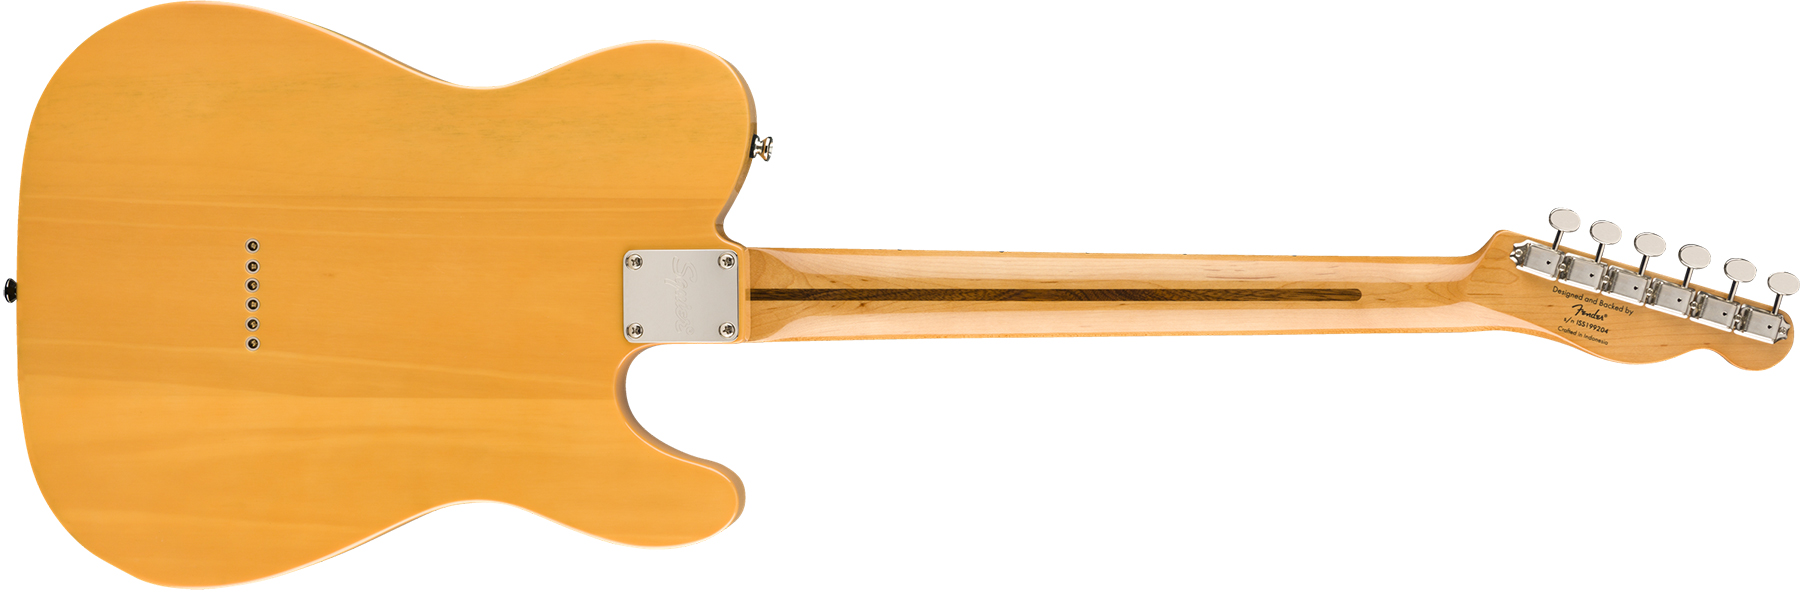 Squier Tele '50s Lh Gaucher Classic Vibe 2019 Mn 2019 - Butterscotch Blonde - Left-handed electric guitar - Variation 1